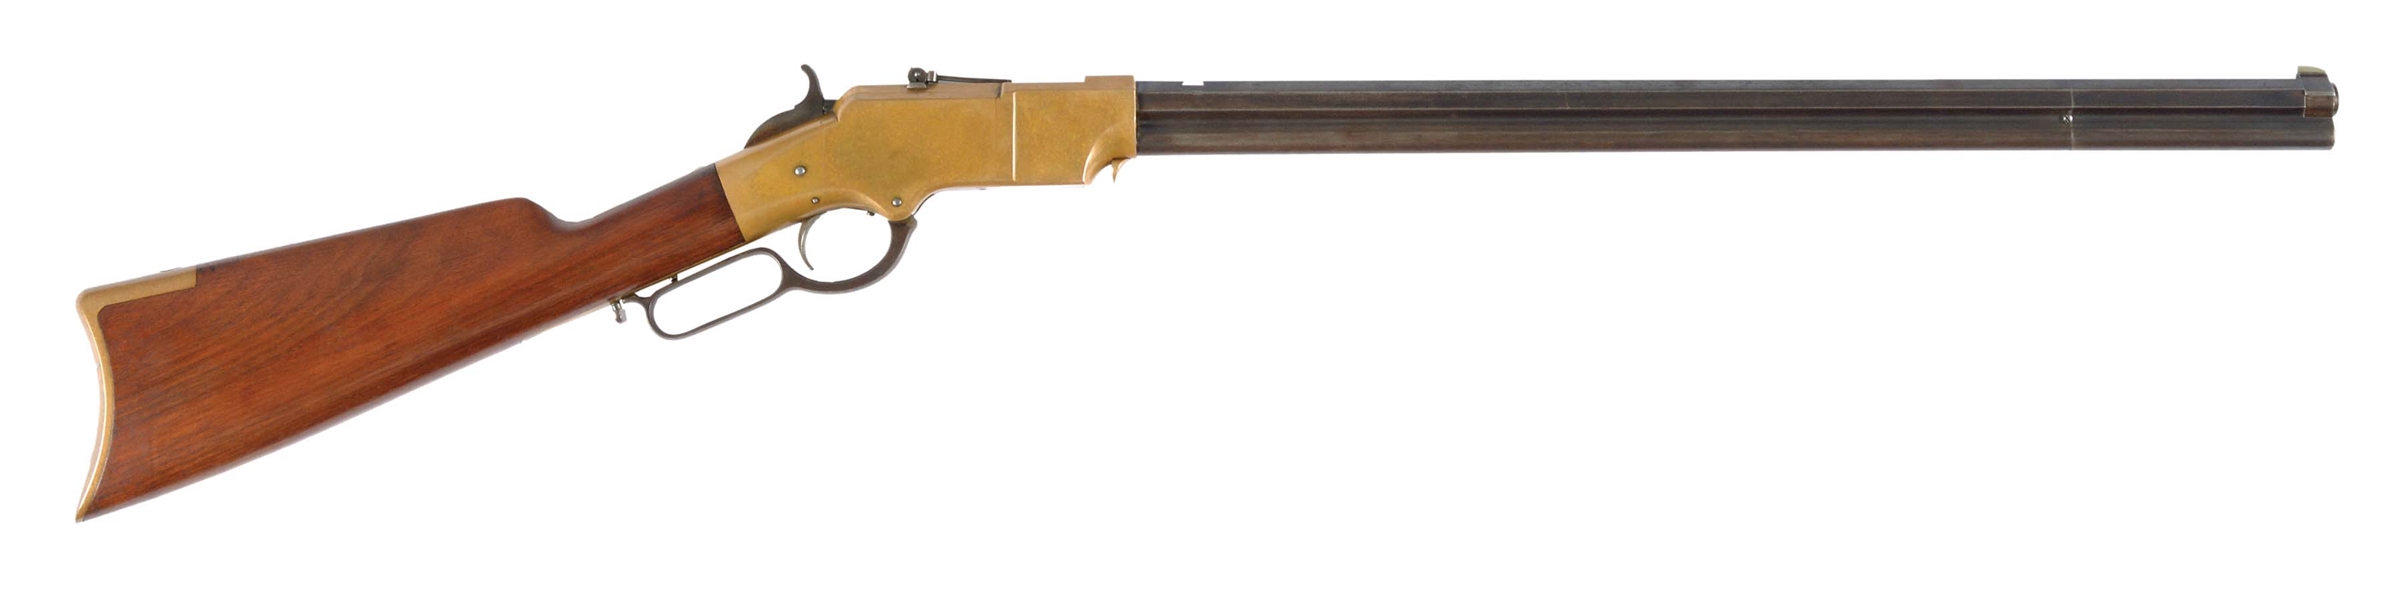 (A) NEW HAVEN ARMS CO. HENRY MODEL 1860 LEVER ACTION RIFLE.